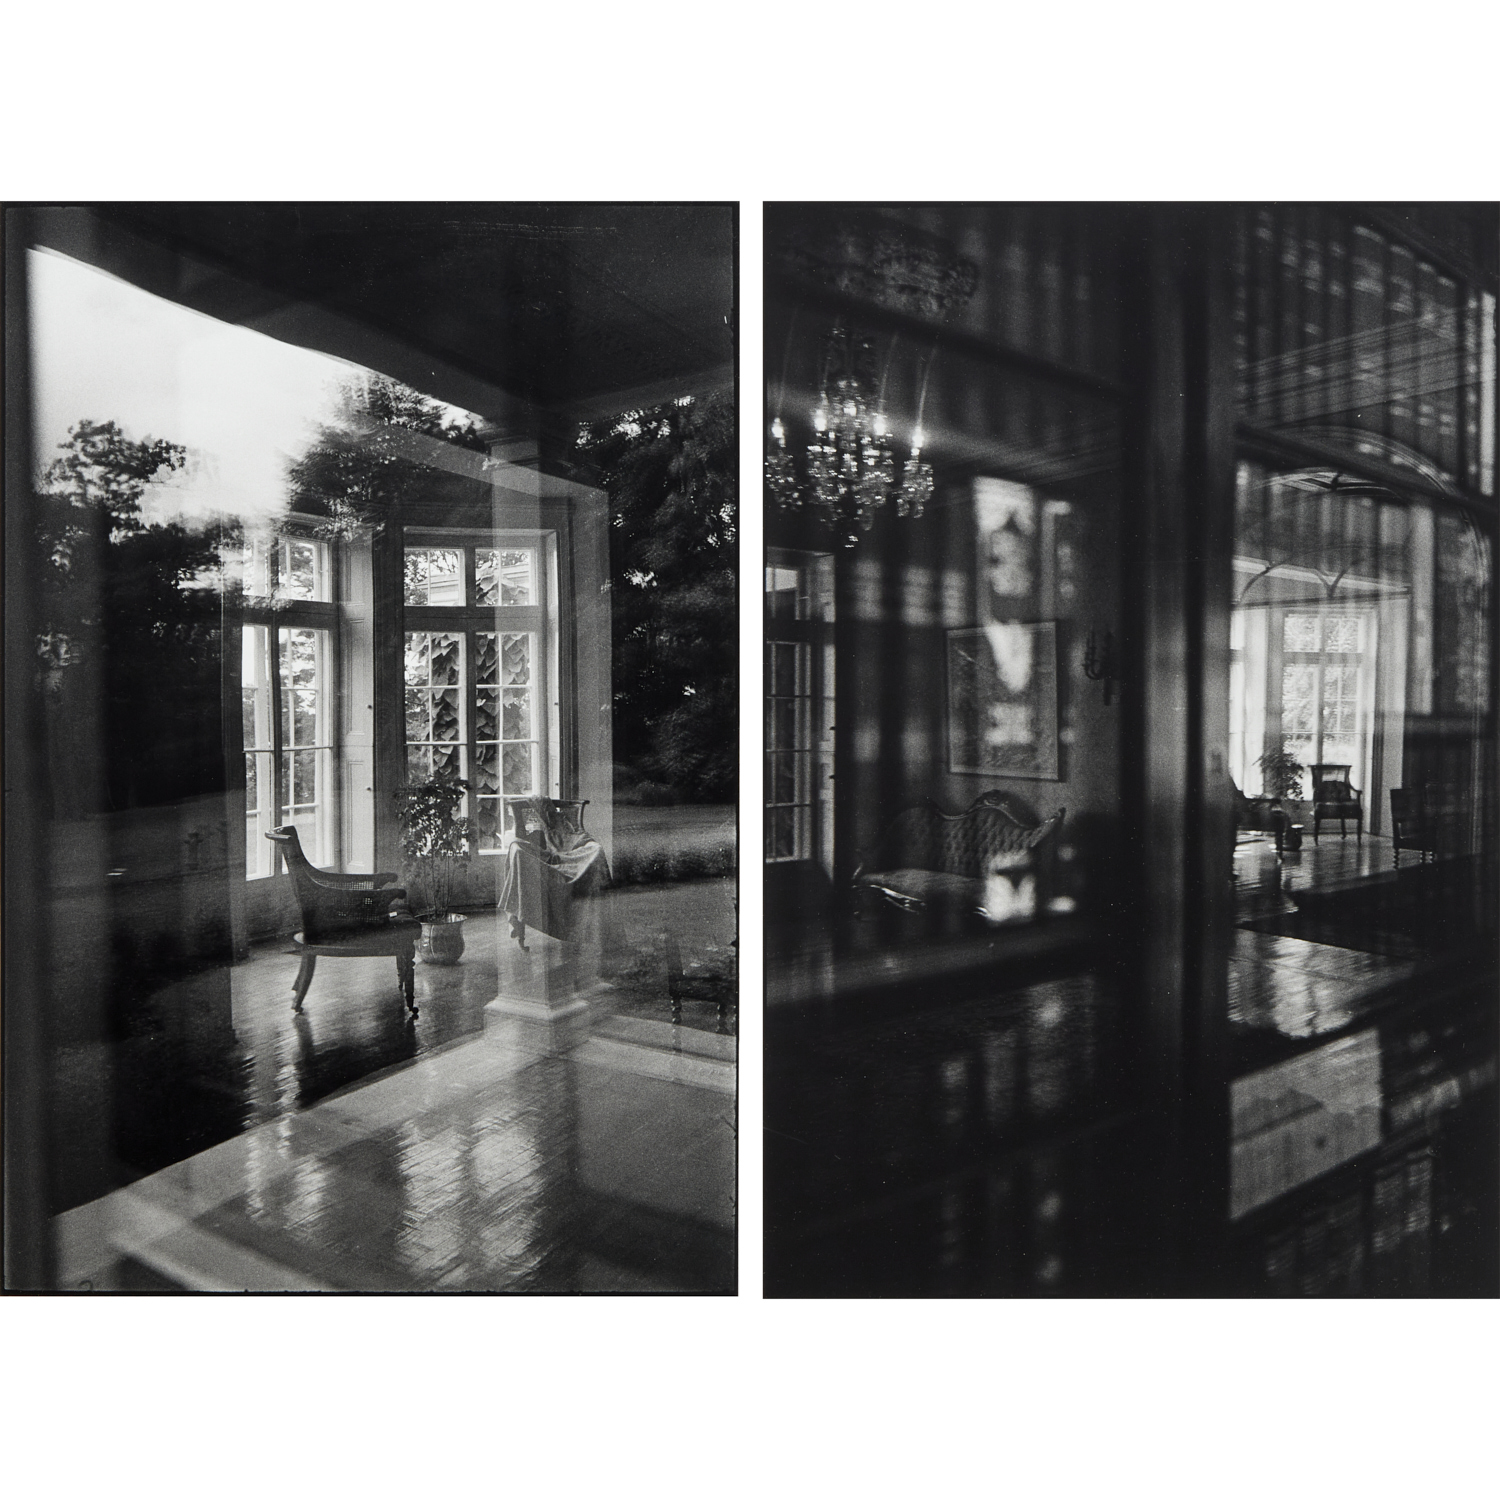 SERGE CLEMENT, PAIR OF PHOTOGRAPHS,